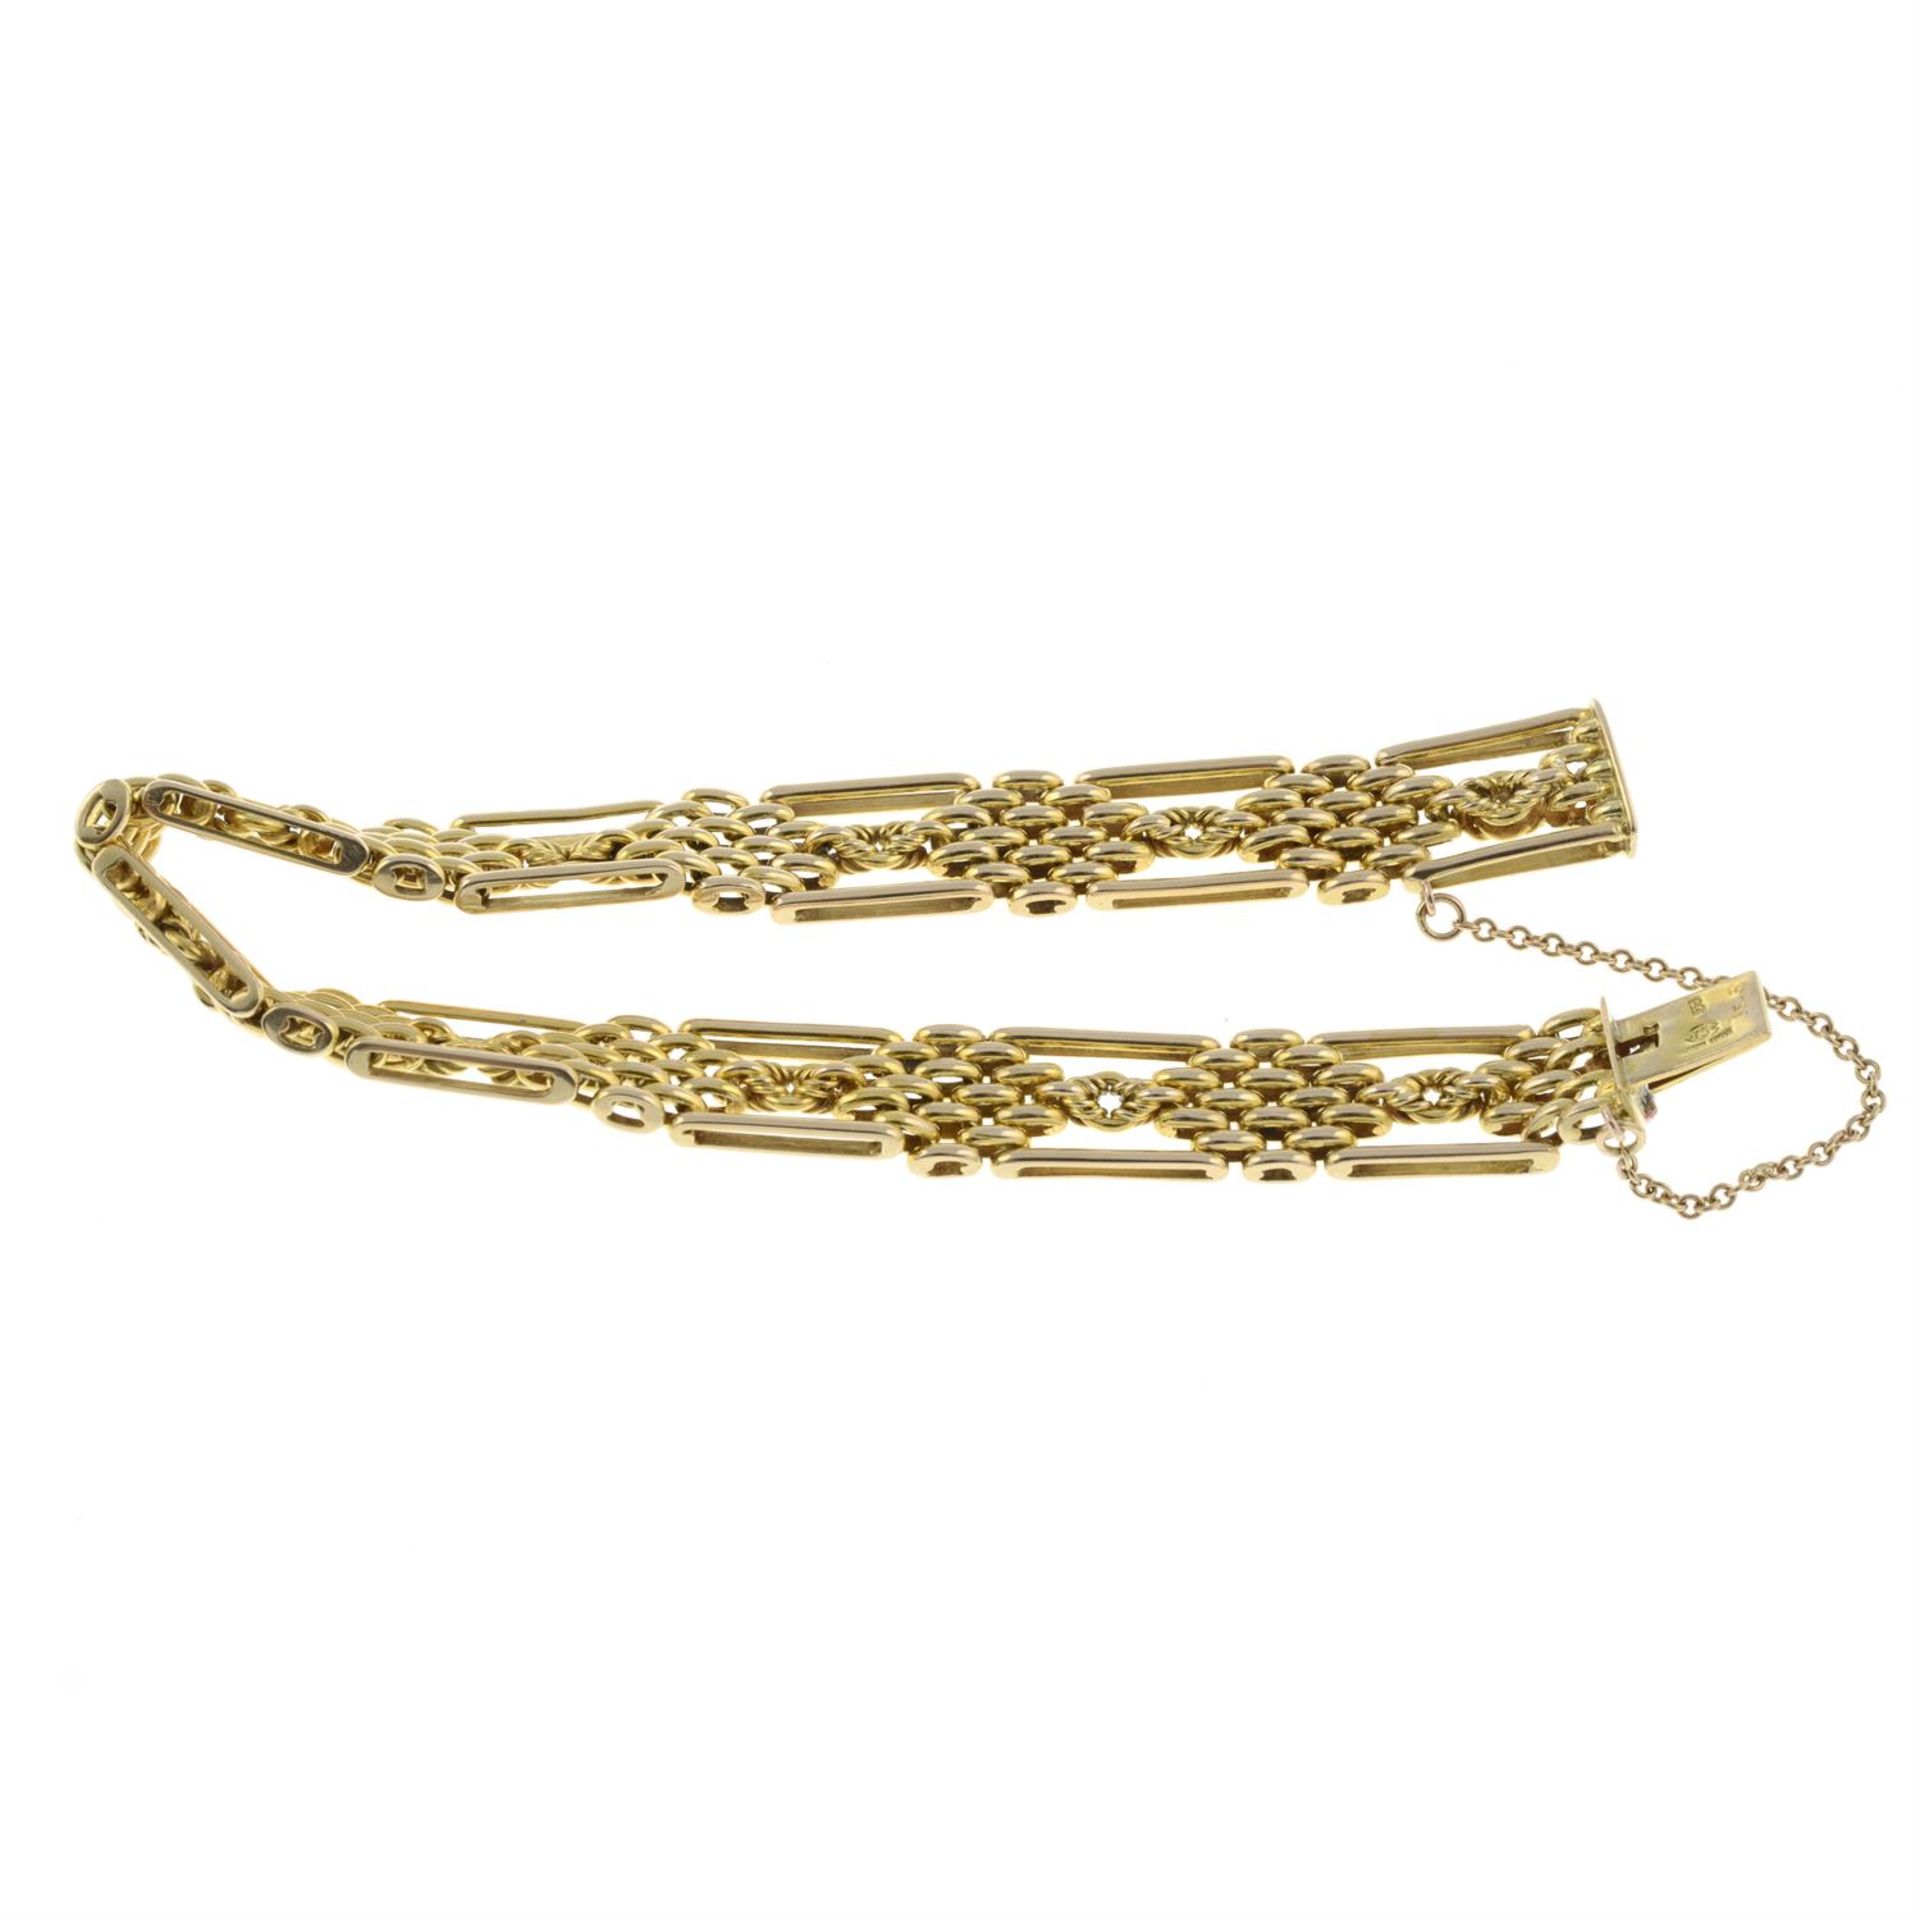 A gate-link bracelet, with safety chain. - Image 2 of 2